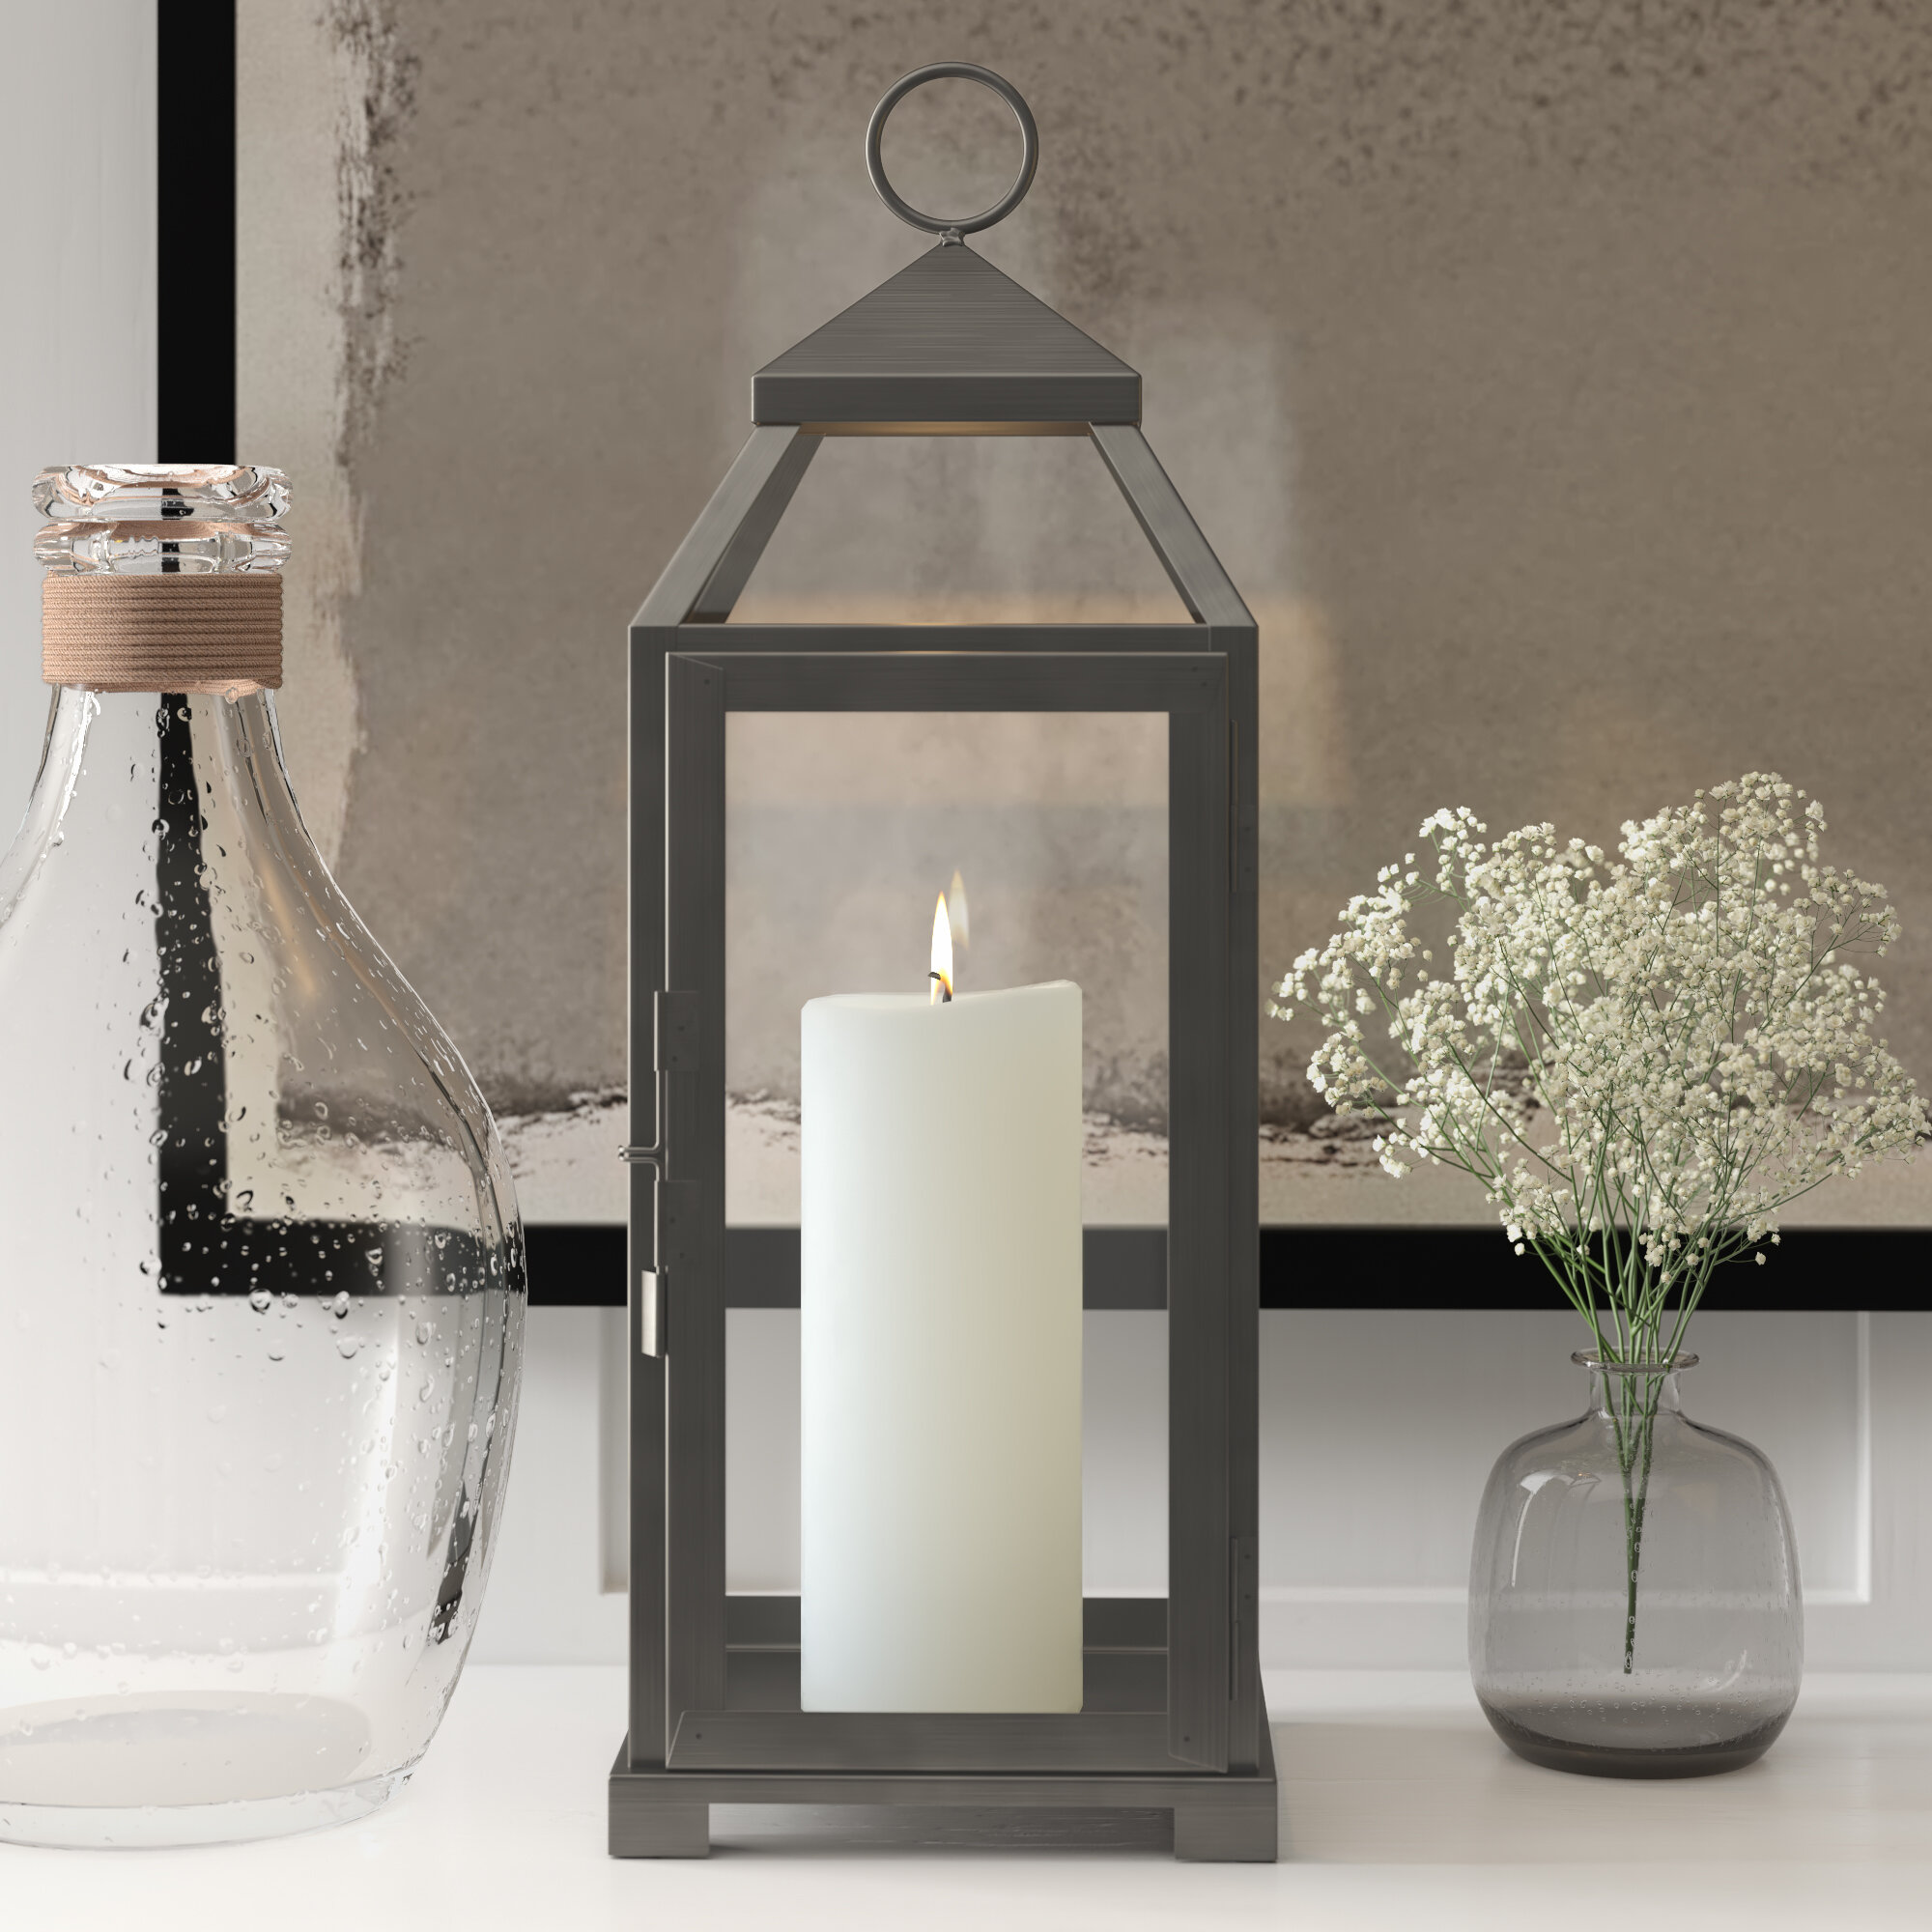 grey lantern candlestick made of glass on stand large